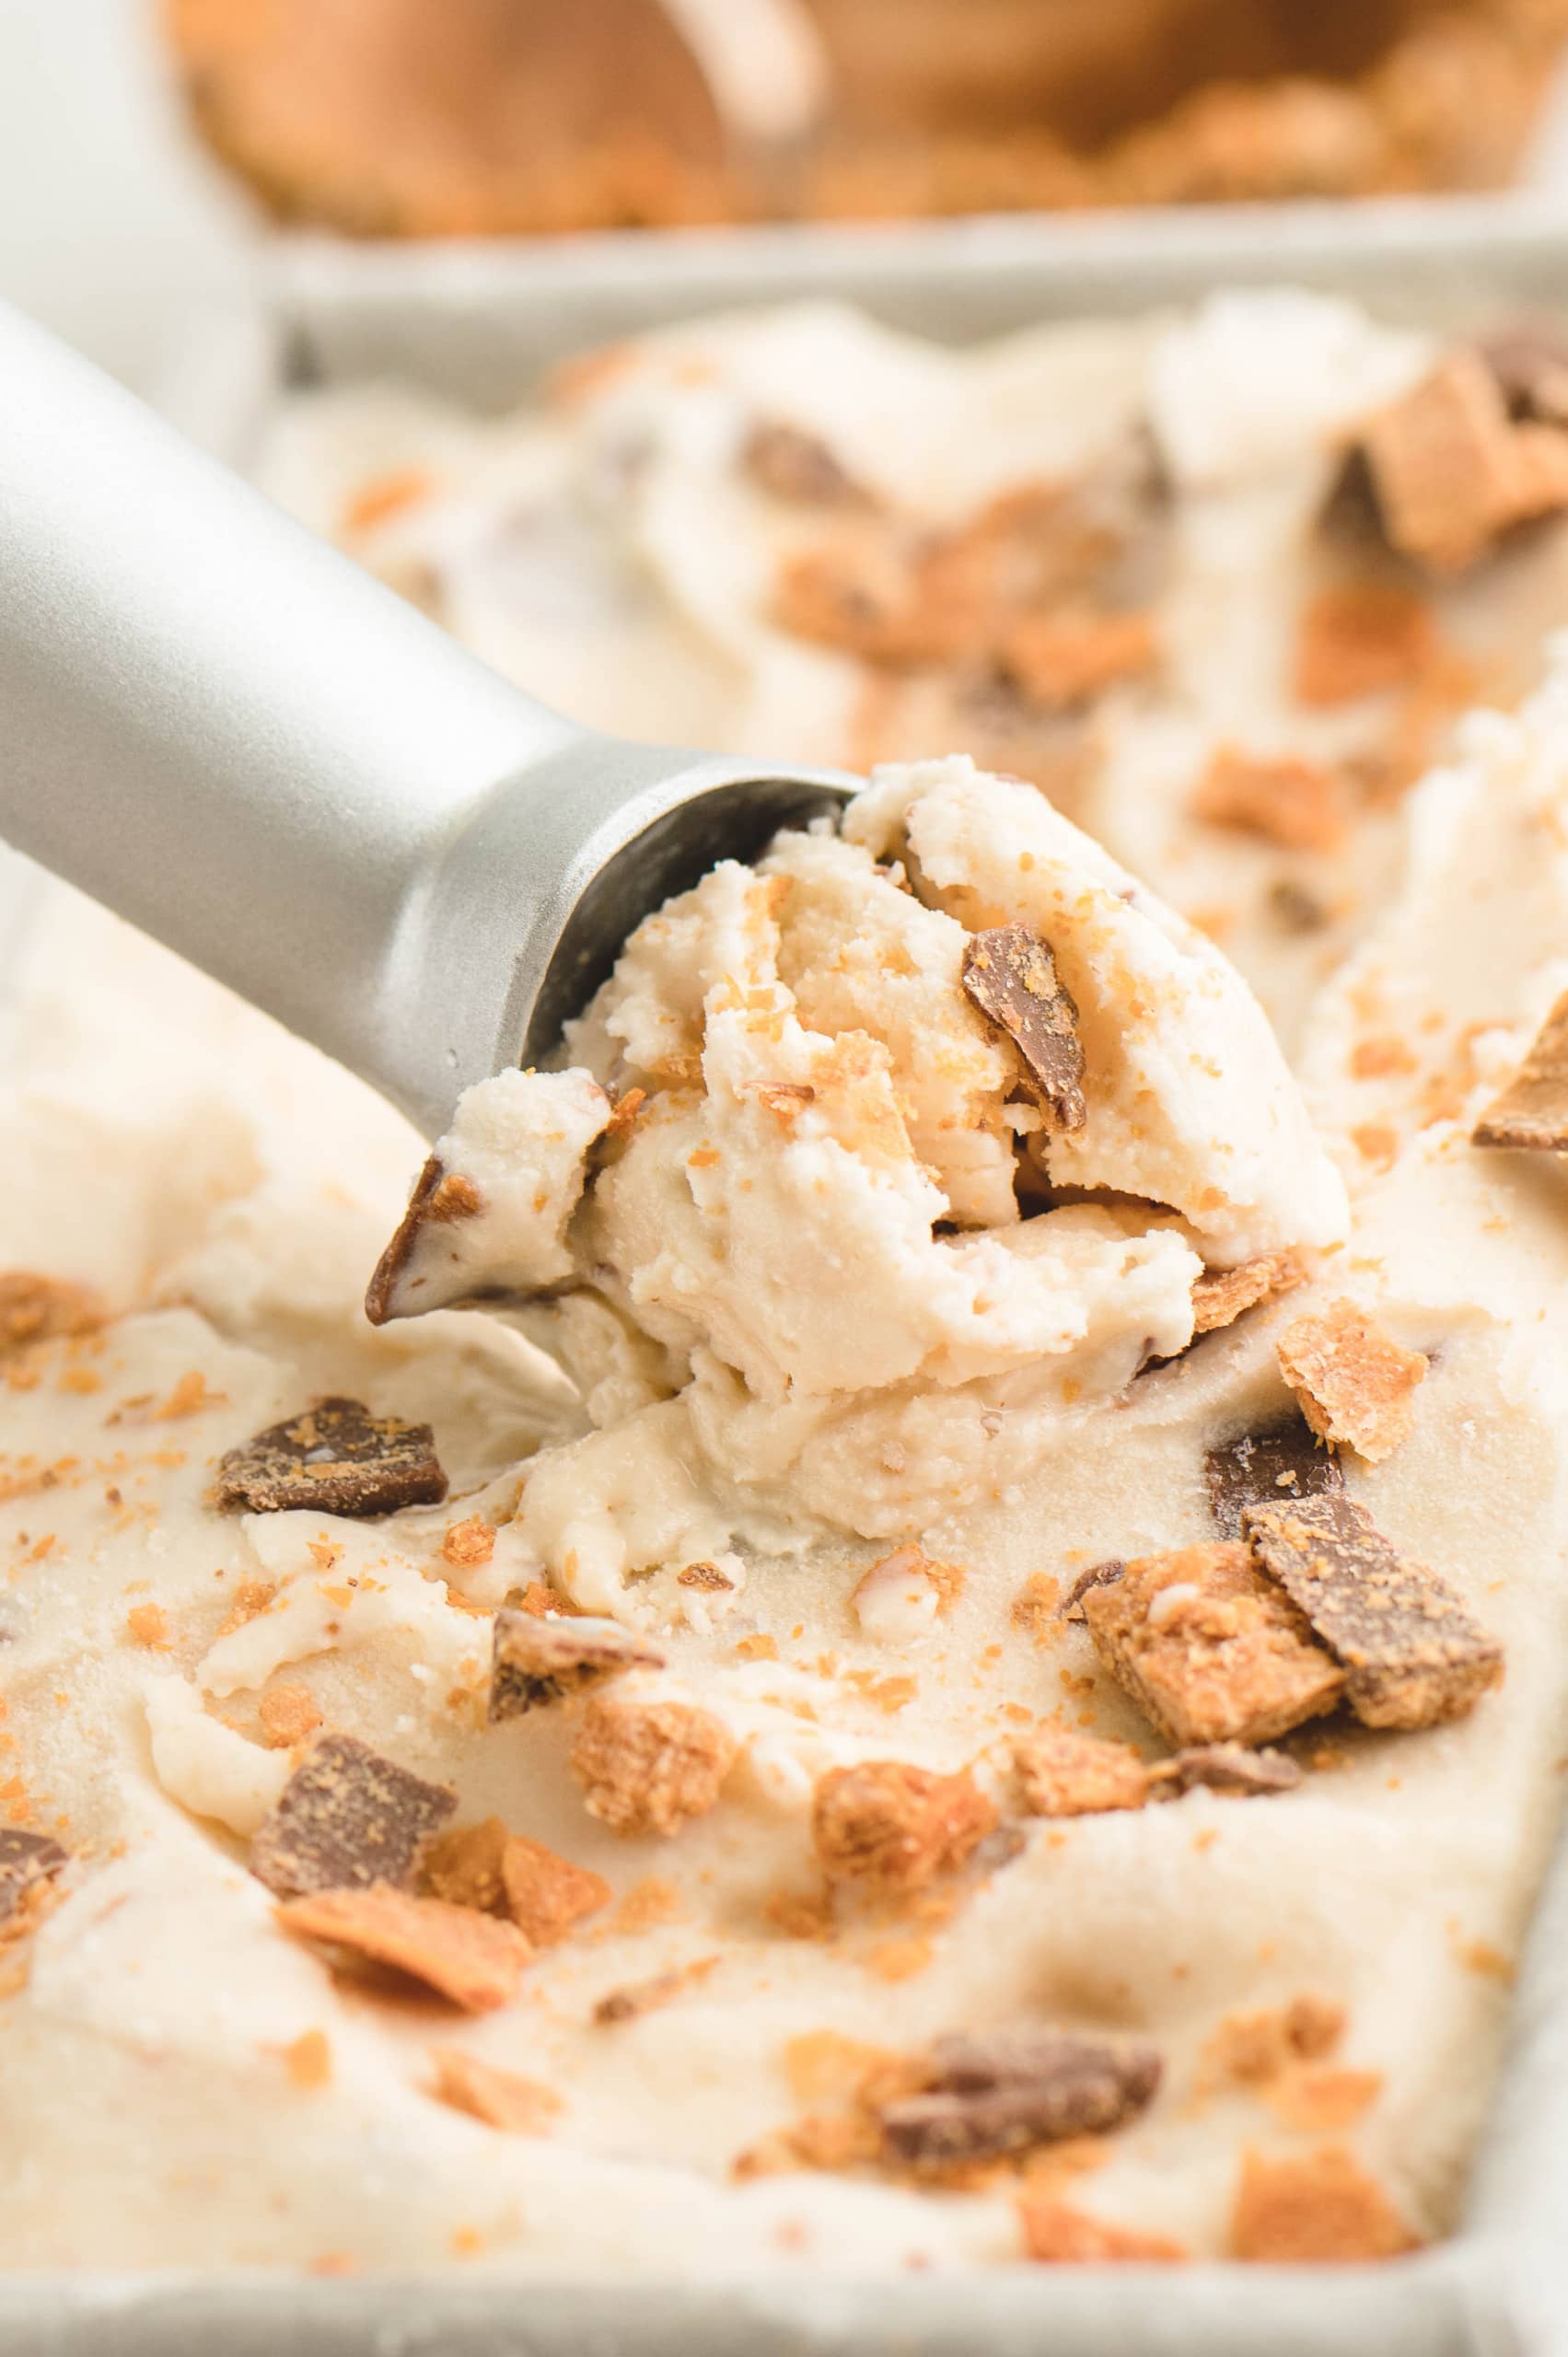 https://www.mommyhatescooking.com/wp-content/uploads/2022/04/Butterfinger-ice-cream-16-scaled.jpg